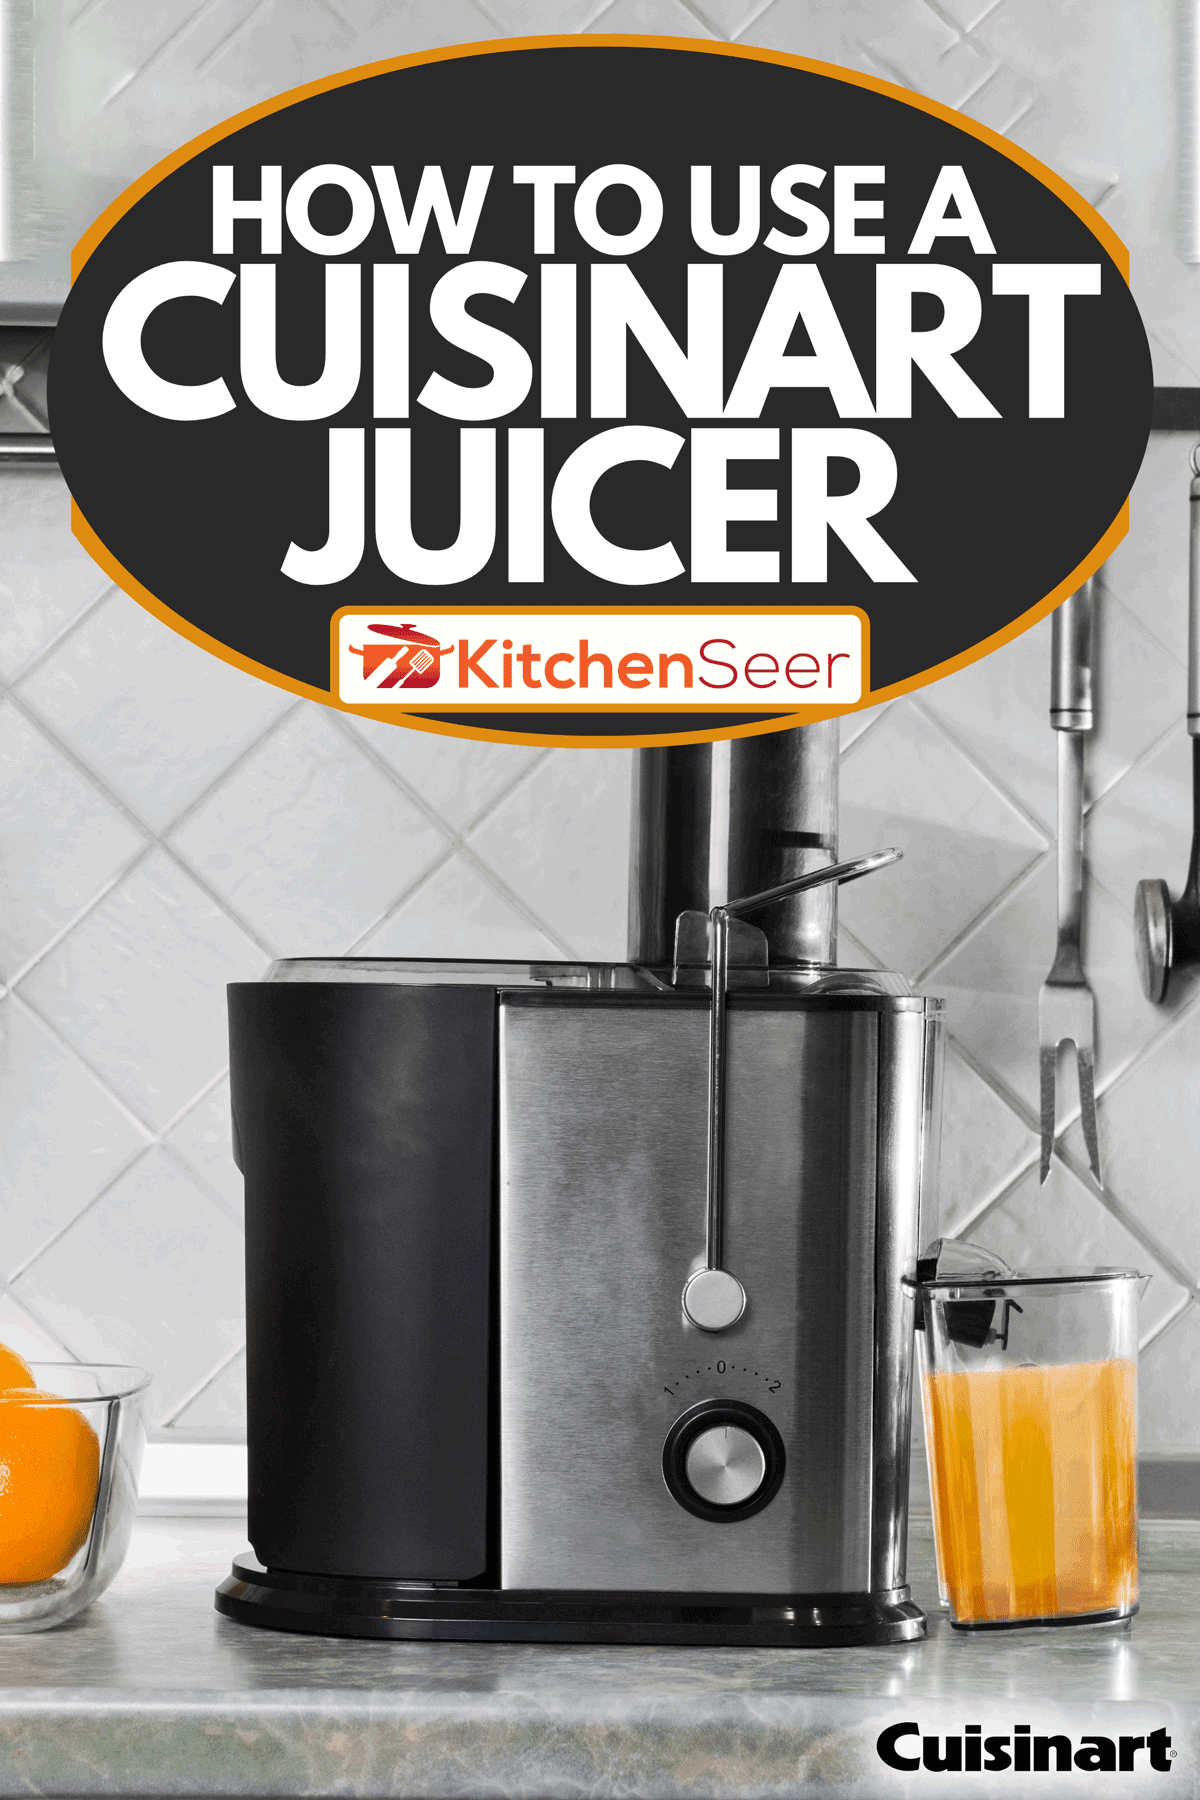 A juicer for fruits and vegetables on the kitchen table, How To Use A Cuisinart Juicer